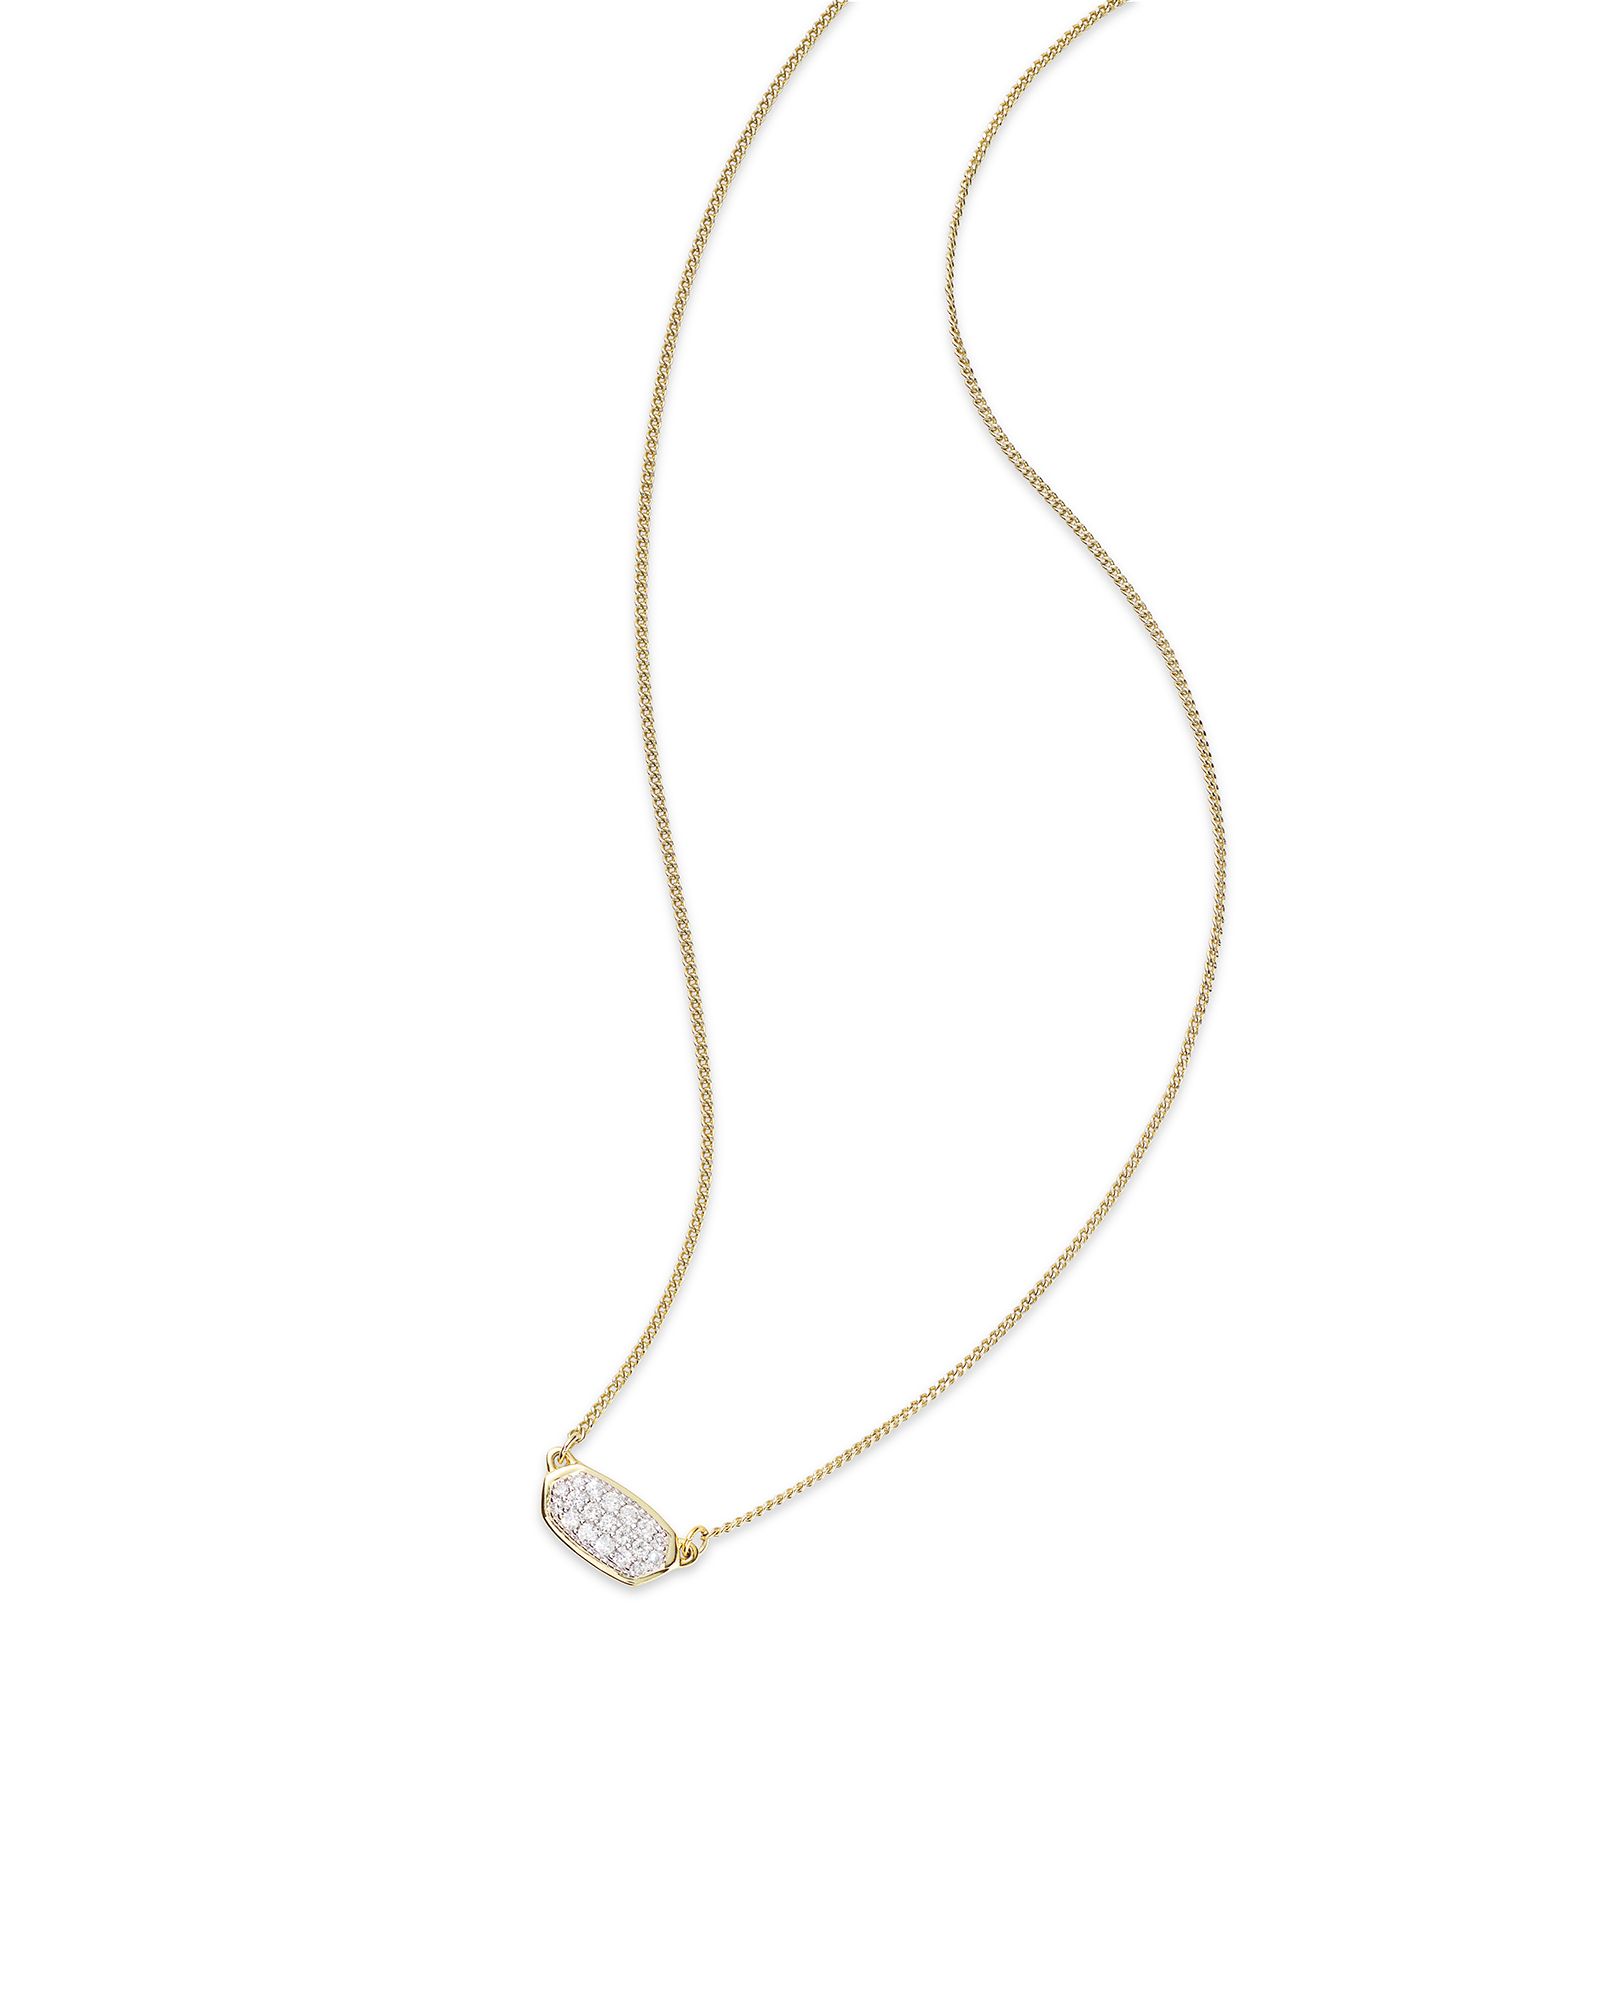 Lisa Pendant Necklace in Pave Diamond and 14k Yellow Gold | Kendra Scott